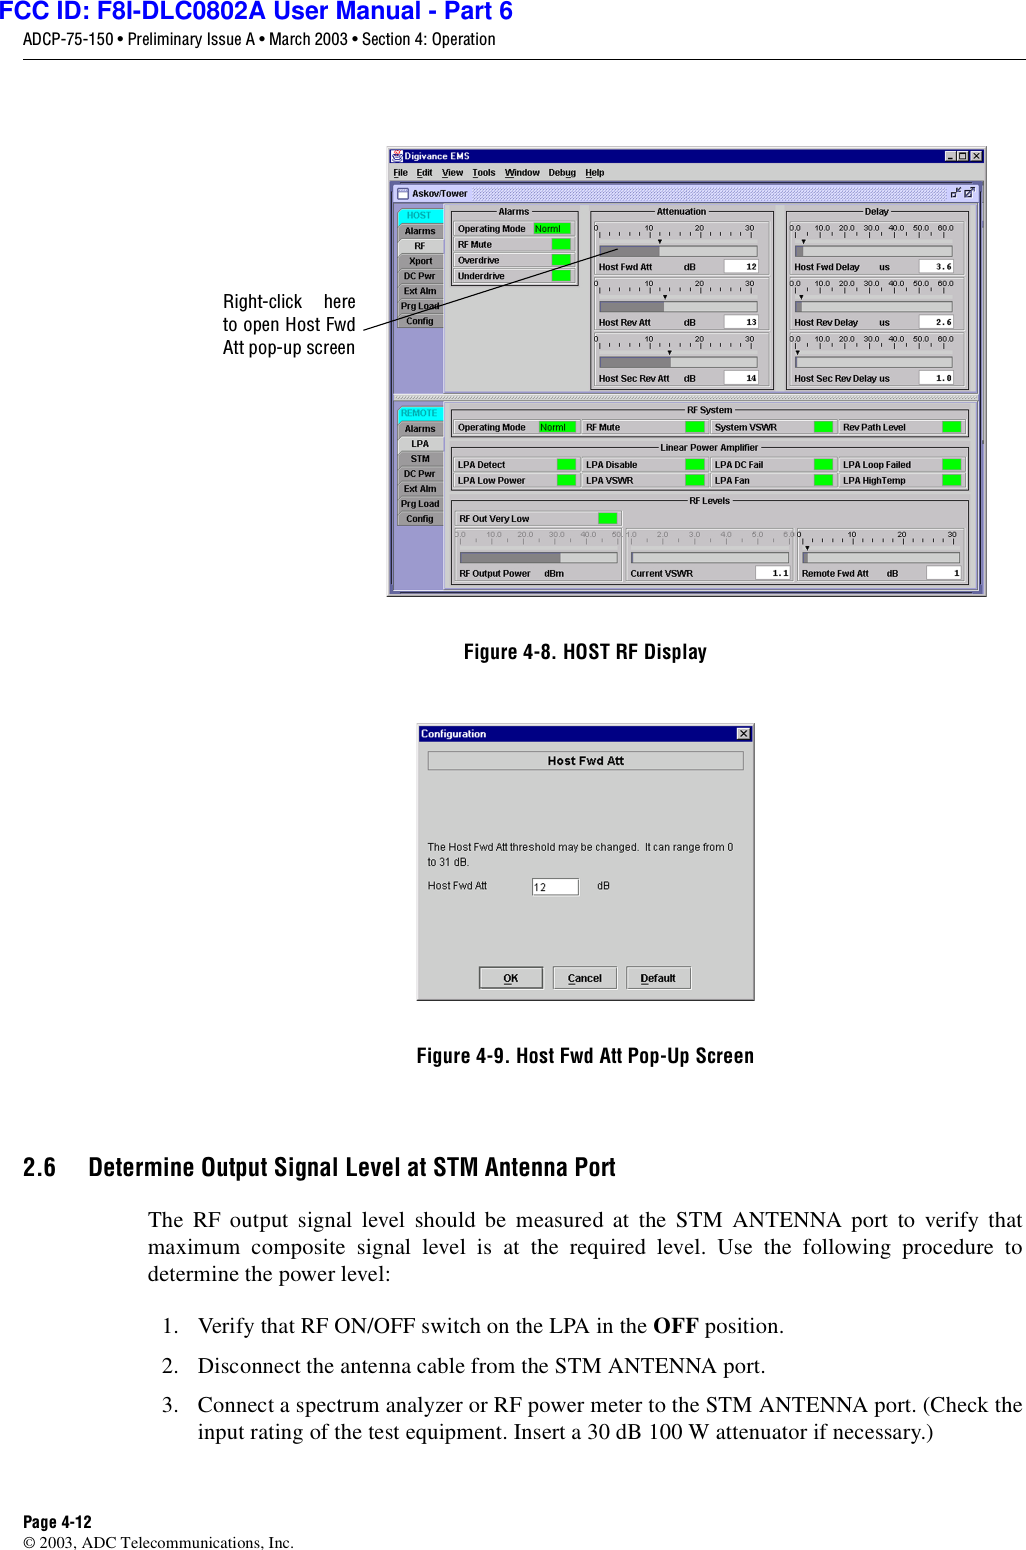 ADCP-75-150 • Preliminary Issue A • March 2003 • Section 4: OperationPage 4-12©2003, ADC Telecommunications, Inc.Figure 4-8. HOST RF DisplayFigure 4-9. Host Fwd Att Pop-Up Screen2.6 Determine Output Signal Level at STM Antenna PortThe RF output signal level should be measured at the STM ANTENNA port to verify thatmaximum composite signal level is at the required level. Use the following procedure todetermine the power level:1. Verify that RF ON/OFF switch on the LPA in the OFF position.2. Disconnect the antenna cable from the STM ANTENNA port.3. Connect aspectrum analyzer or RF power meter to the STM ANTENNA port. (Check theinput rating of the test equipment. Insert a30 dB 100 Wattenuator if necessary.)Right-click hereto open Host FwdAtt pop-up screenFCC ID: F8I-DLC0802A User Manual - Part 6